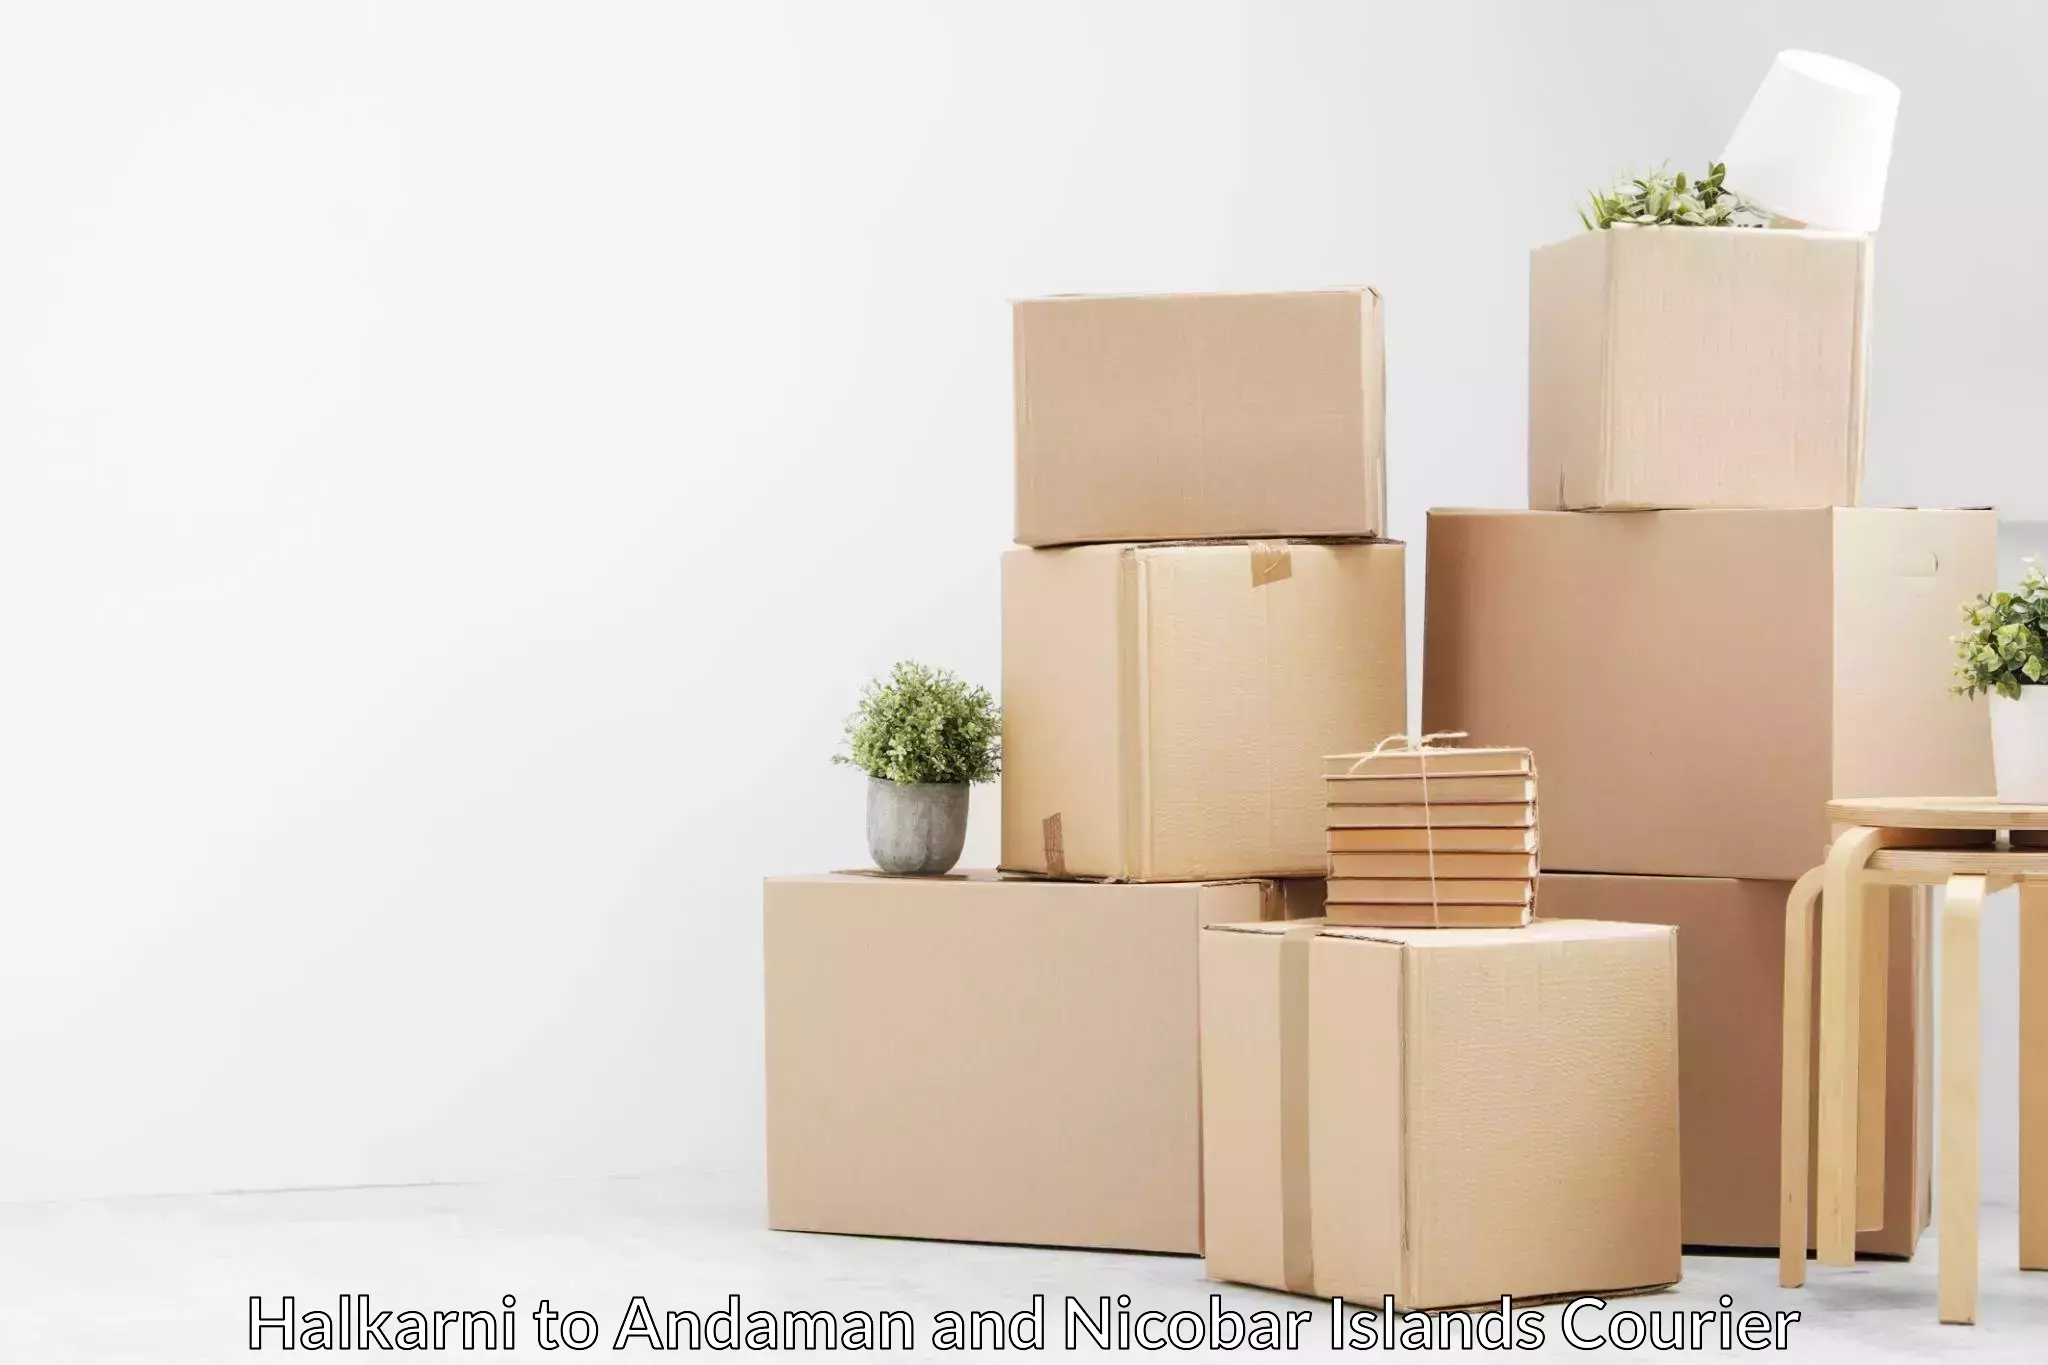 Furniture delivery service Halkarni to North And Middle Andaman